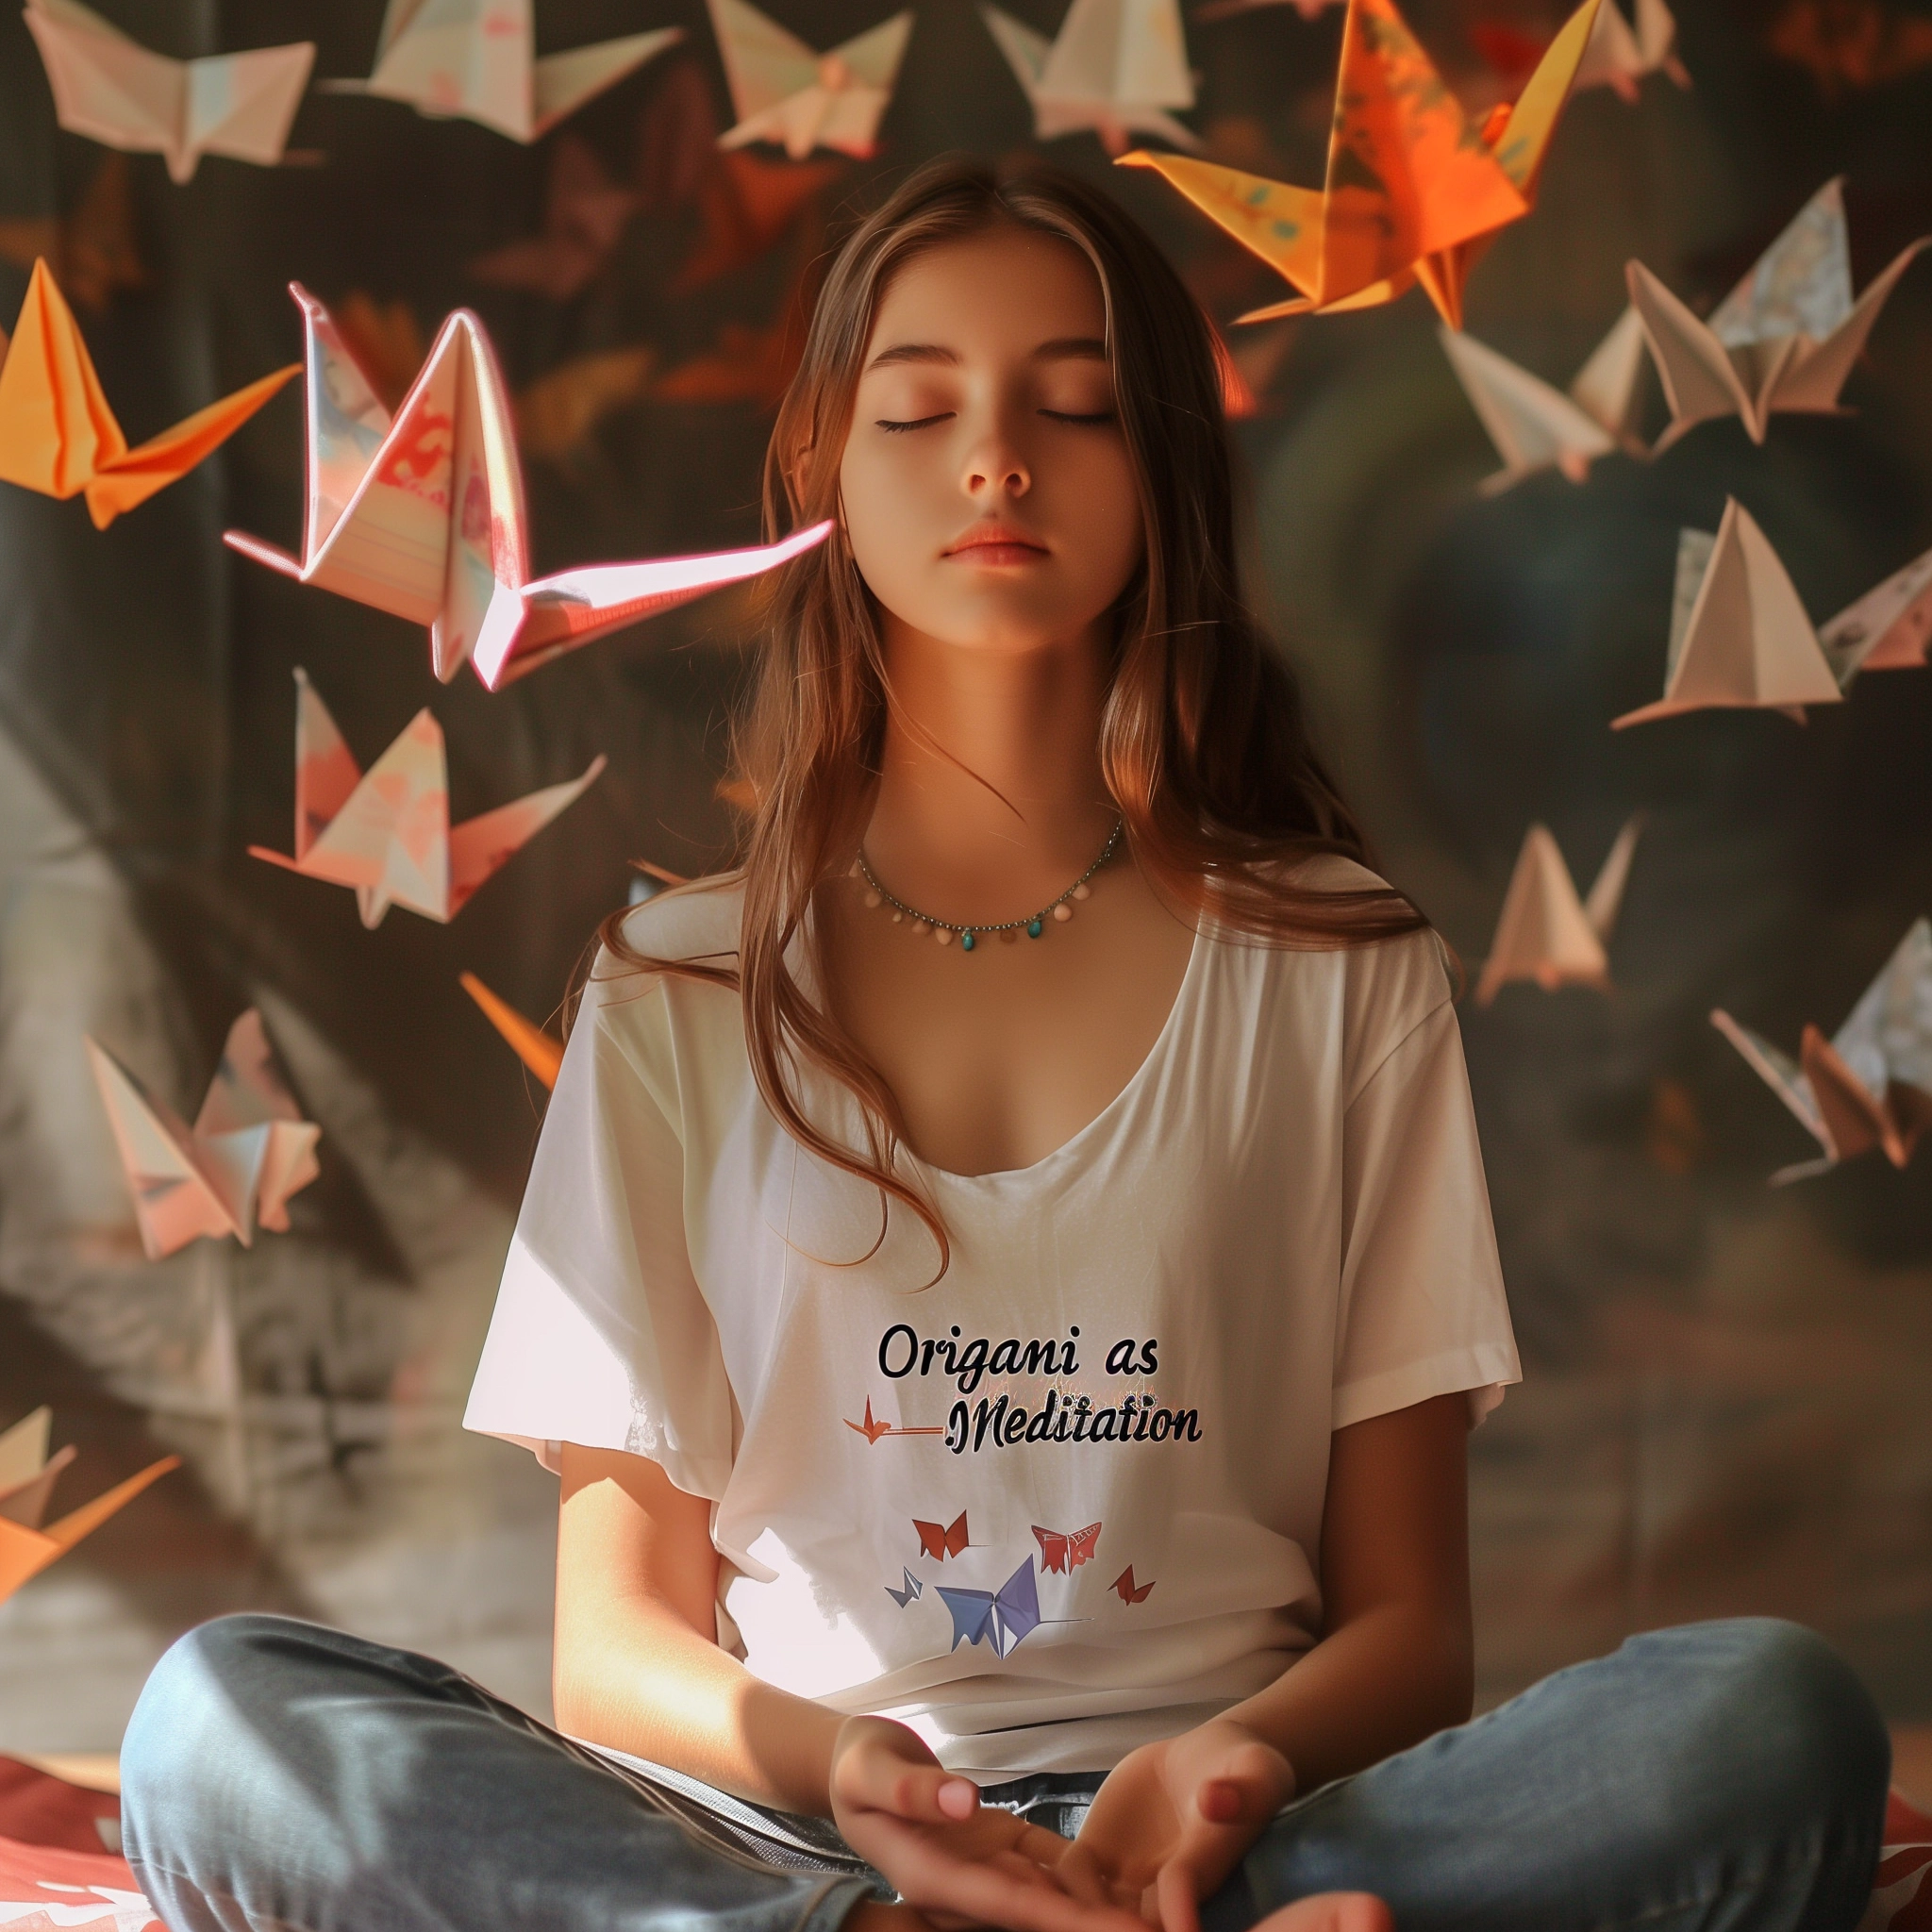 Origami as Meditation: Reducing Stress and Finding Inner Peace"